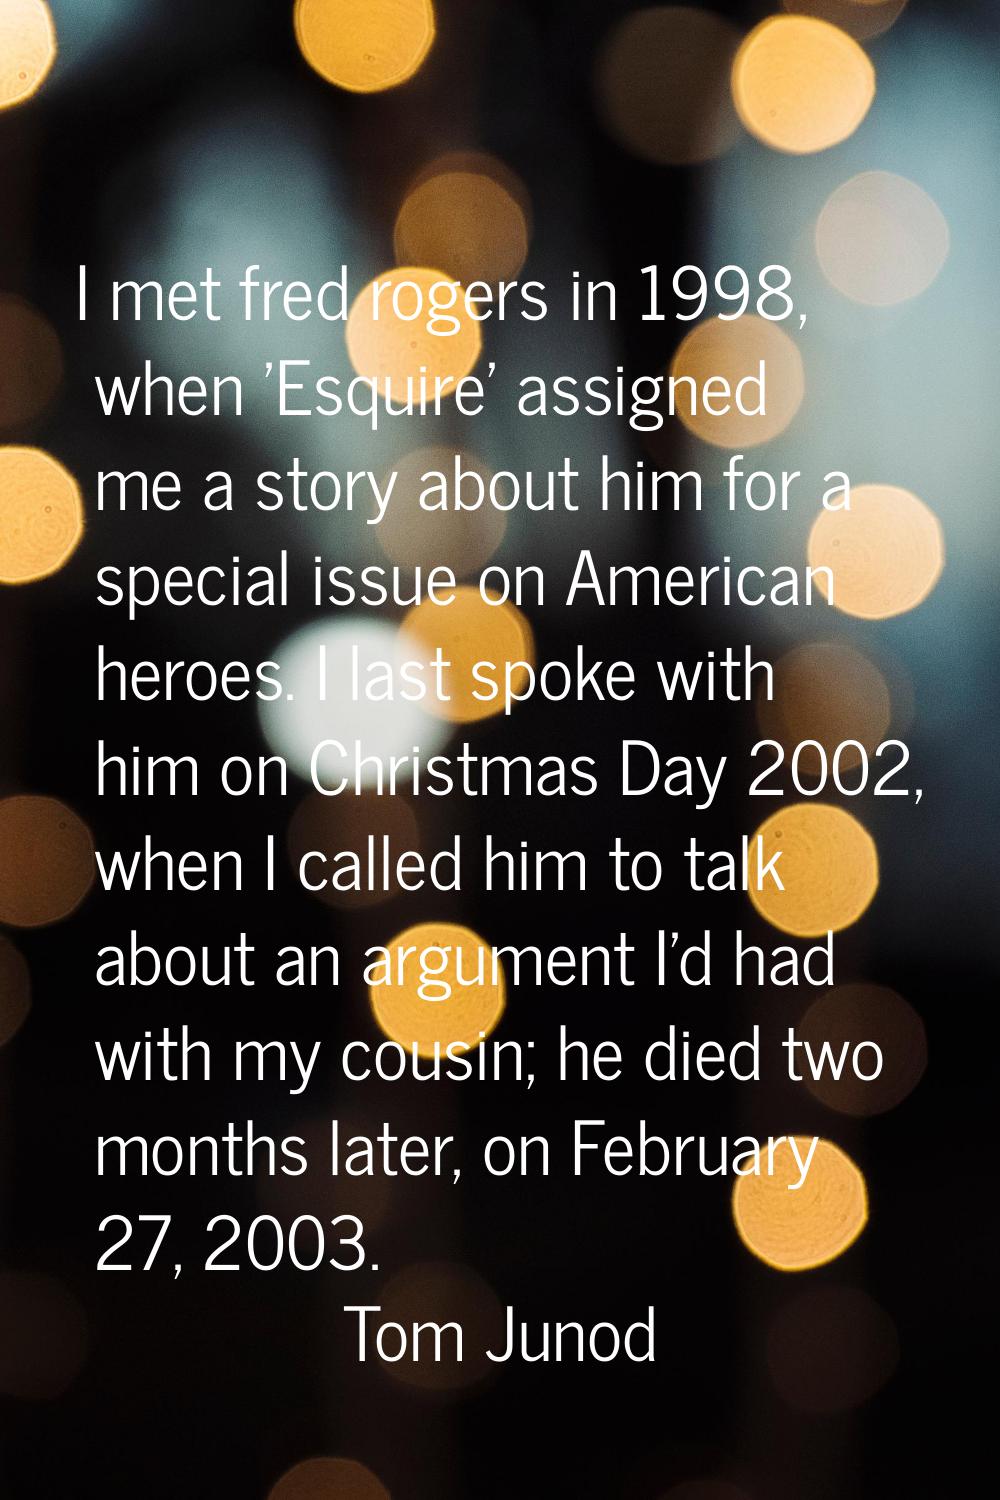 I met fred rogers in 1998, when 'Esquire' assigned me a story about him for a special issue on Amer